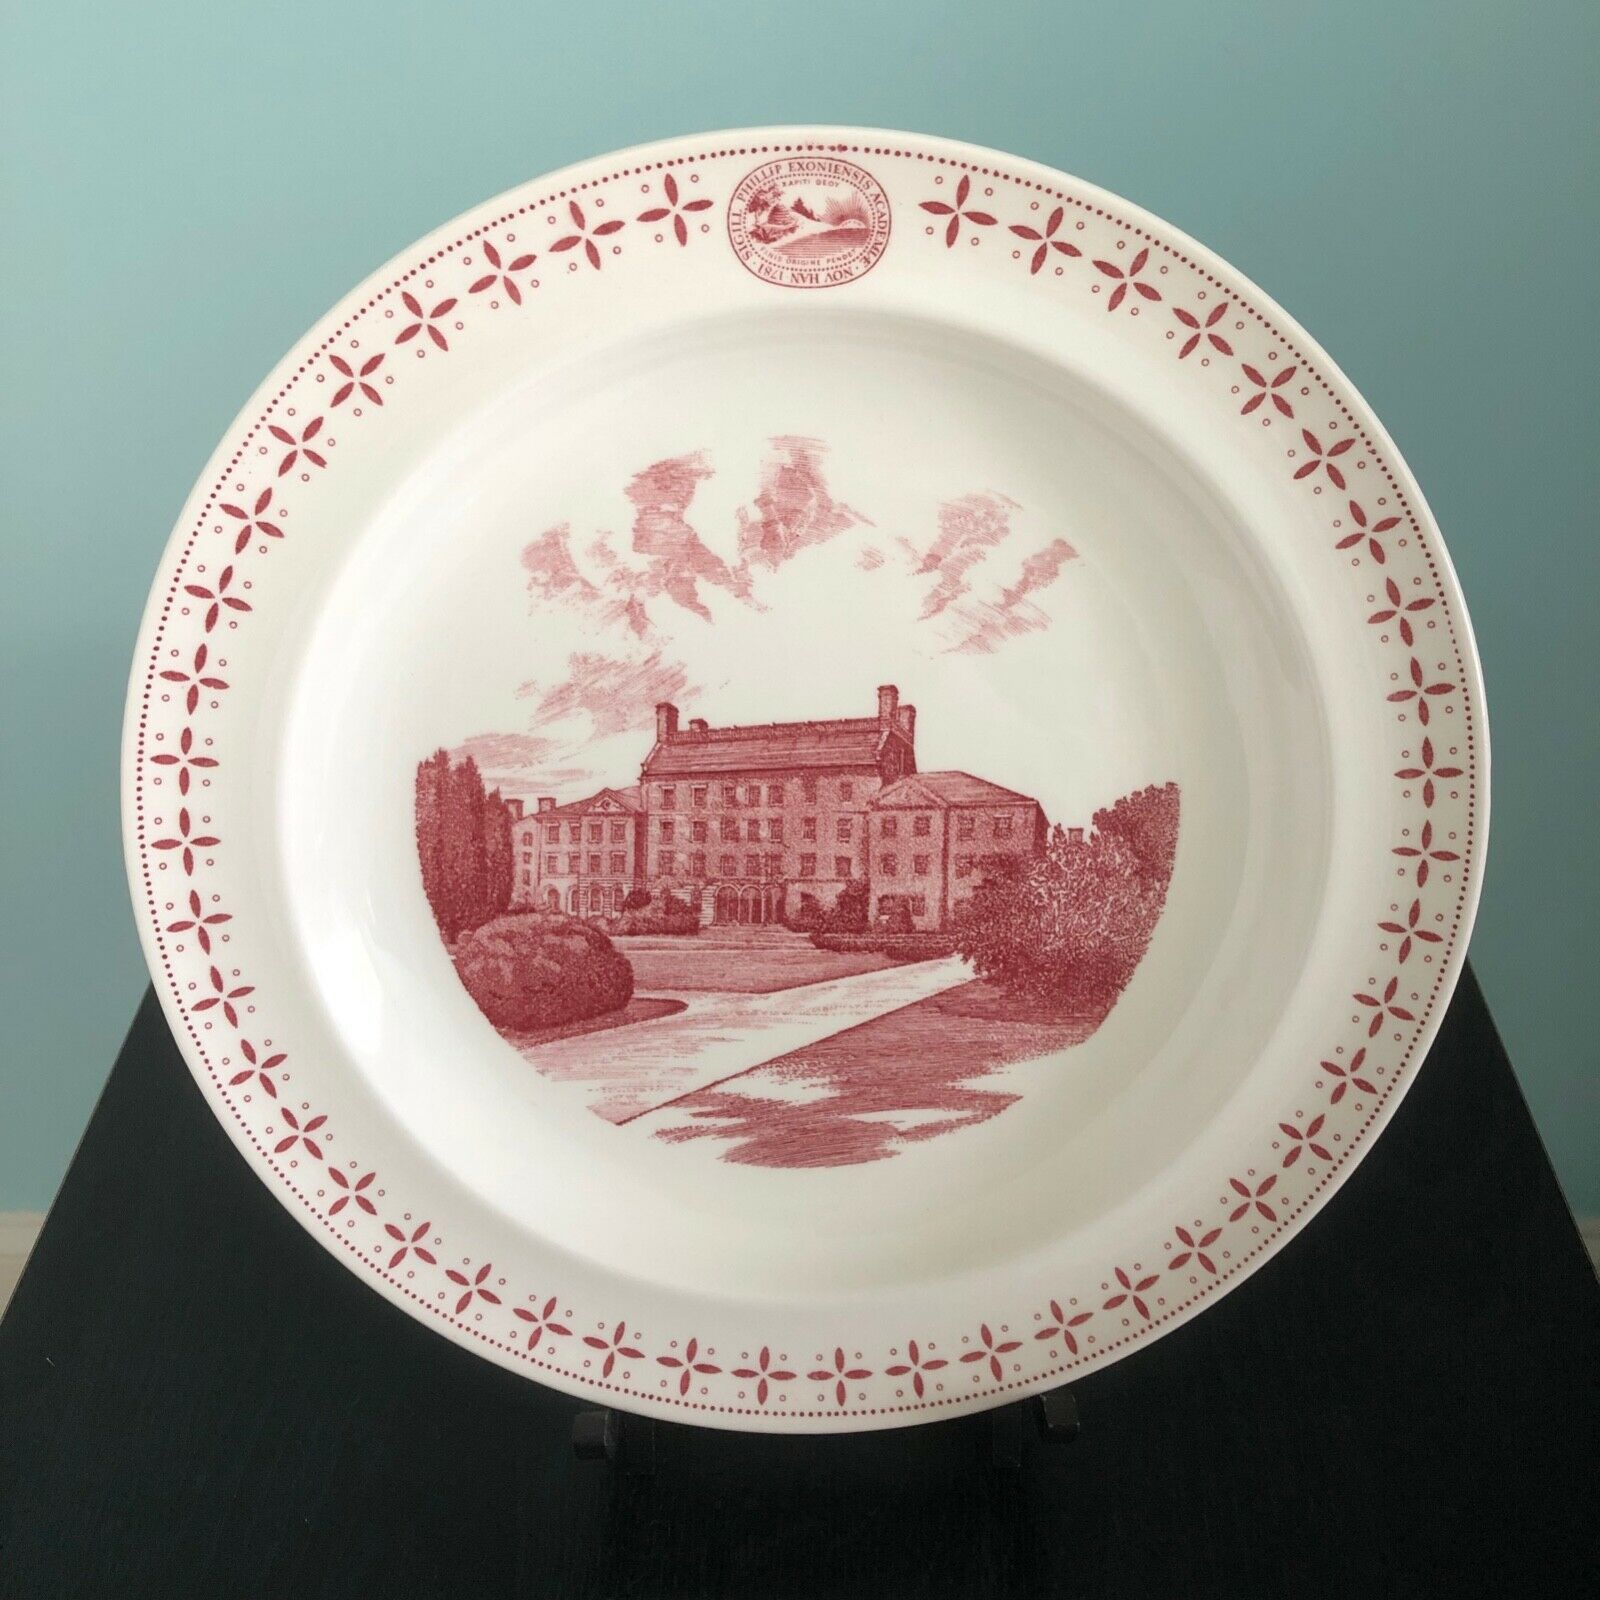 Phillips Exeter Academy Plate "phillips Hall" Wedgwood, 1956